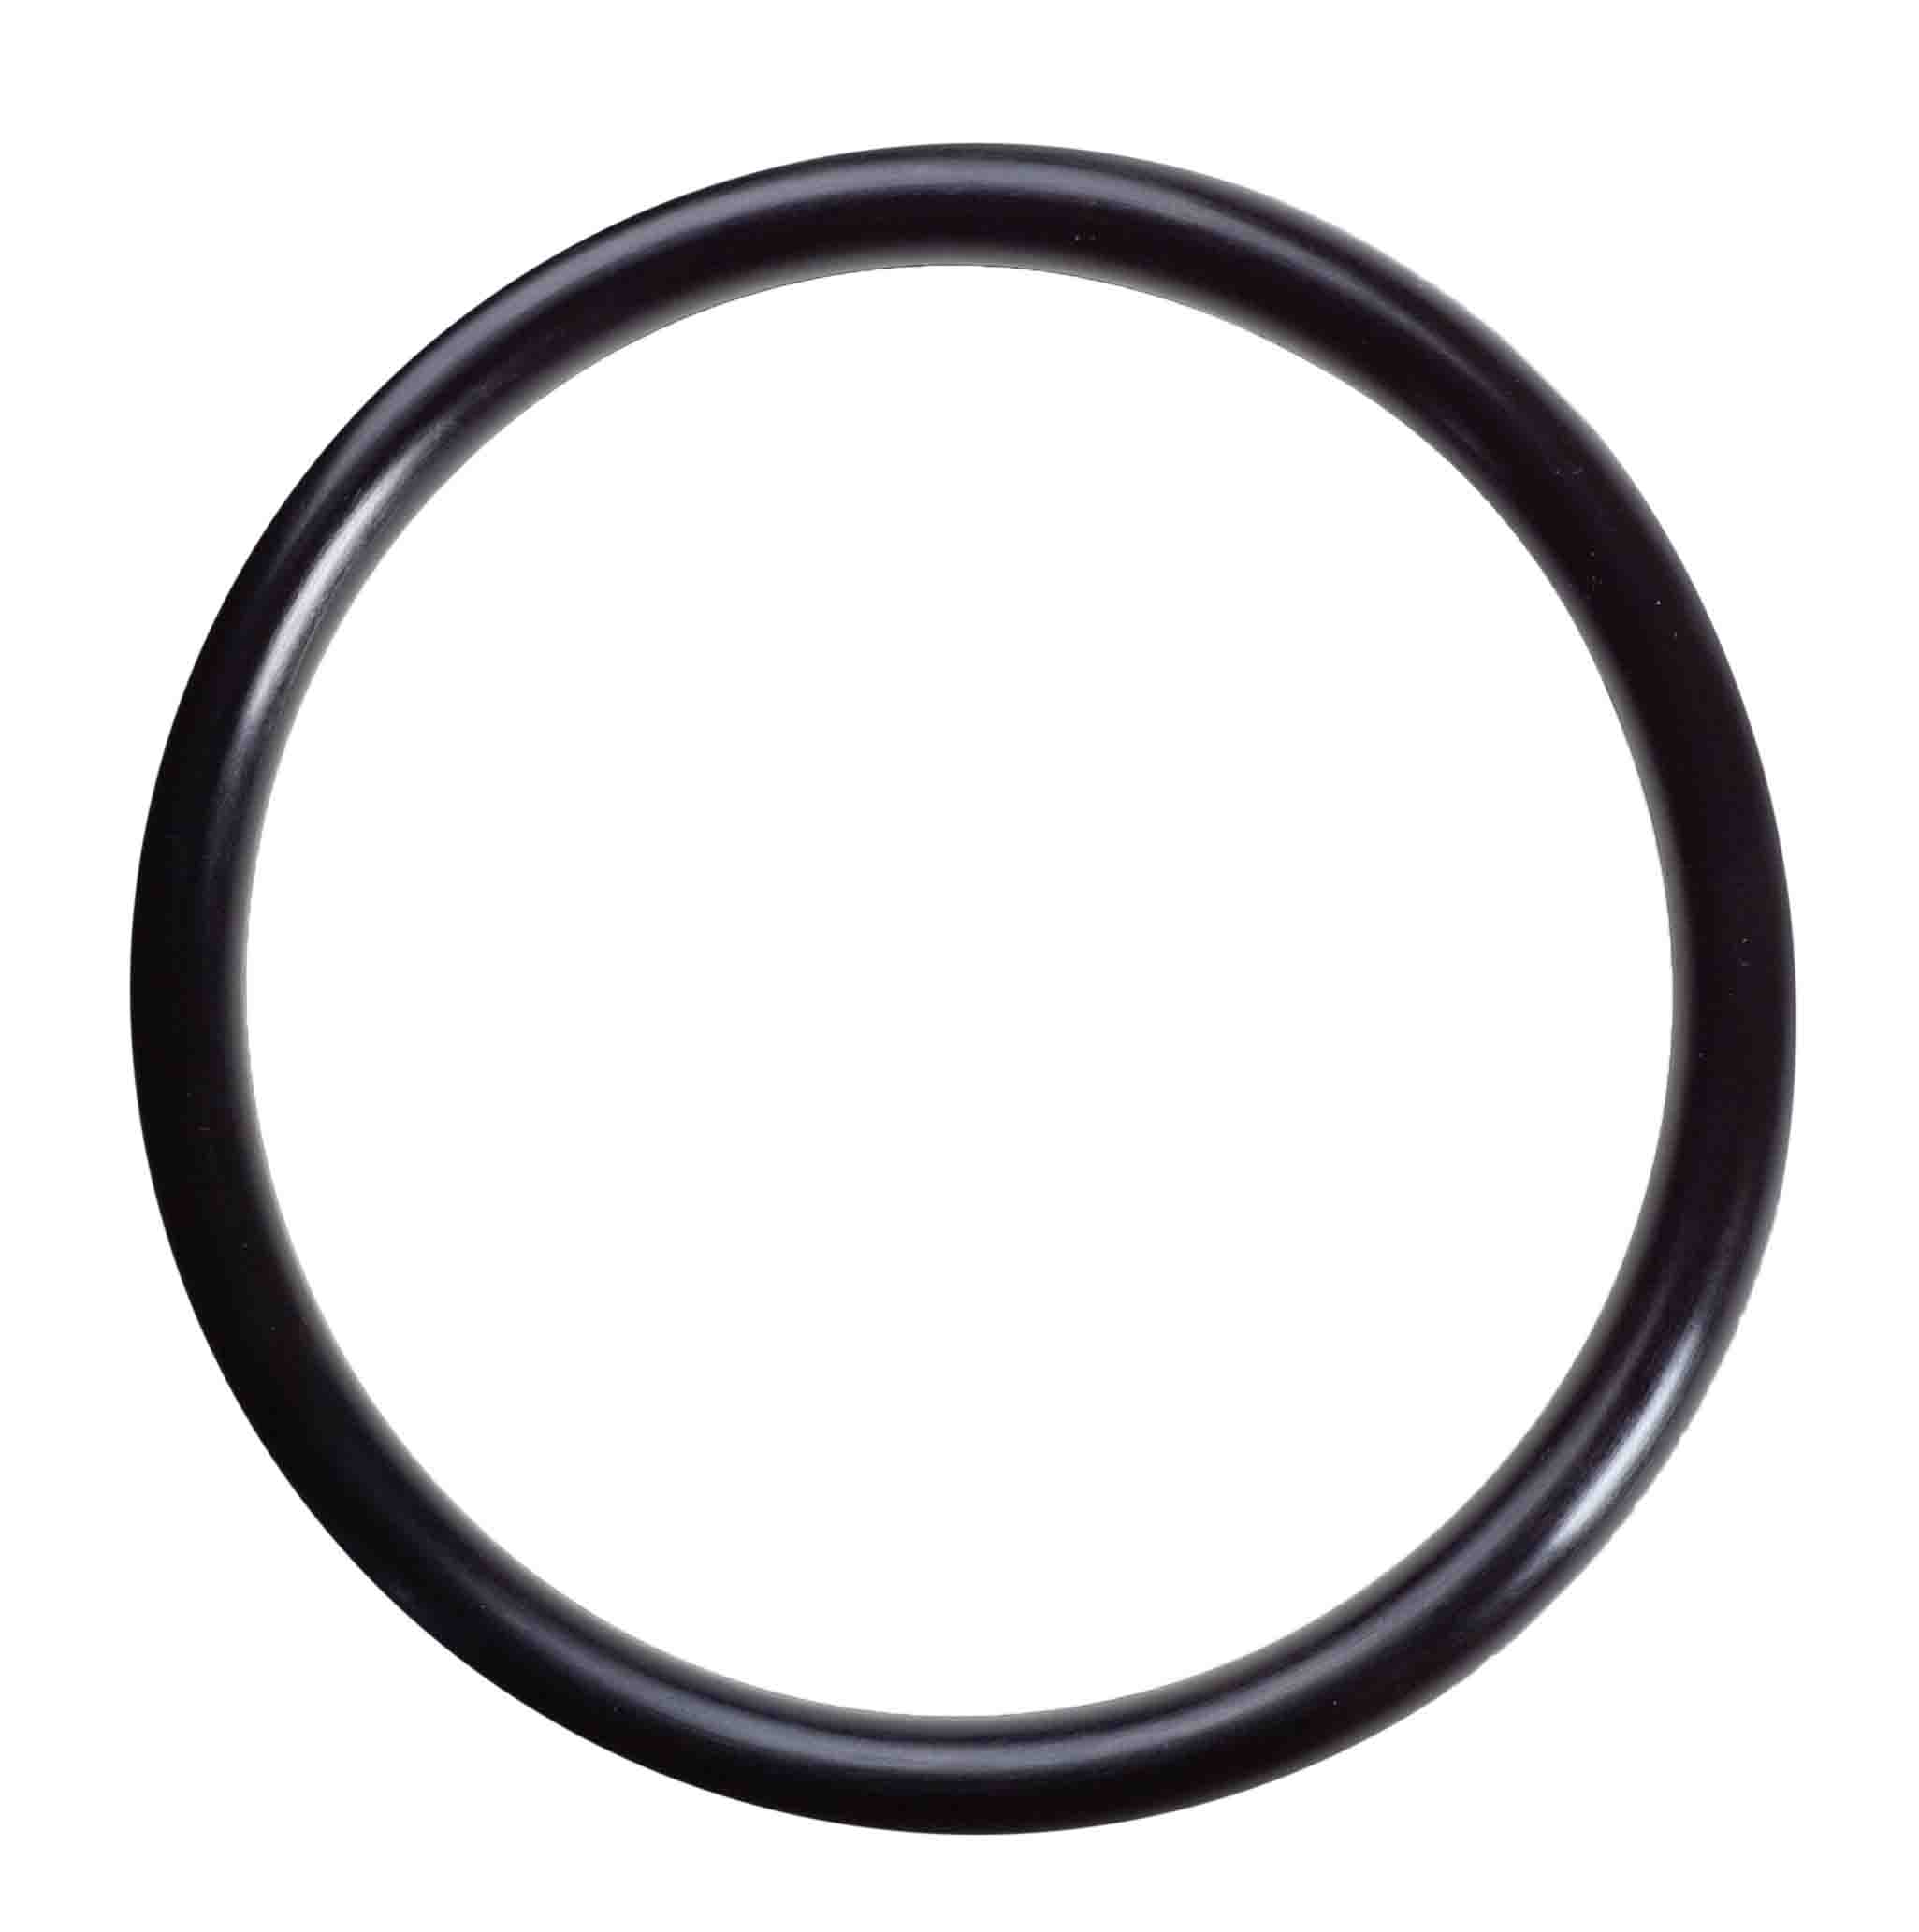 06808LS Housing O-rings for Nanopure II system